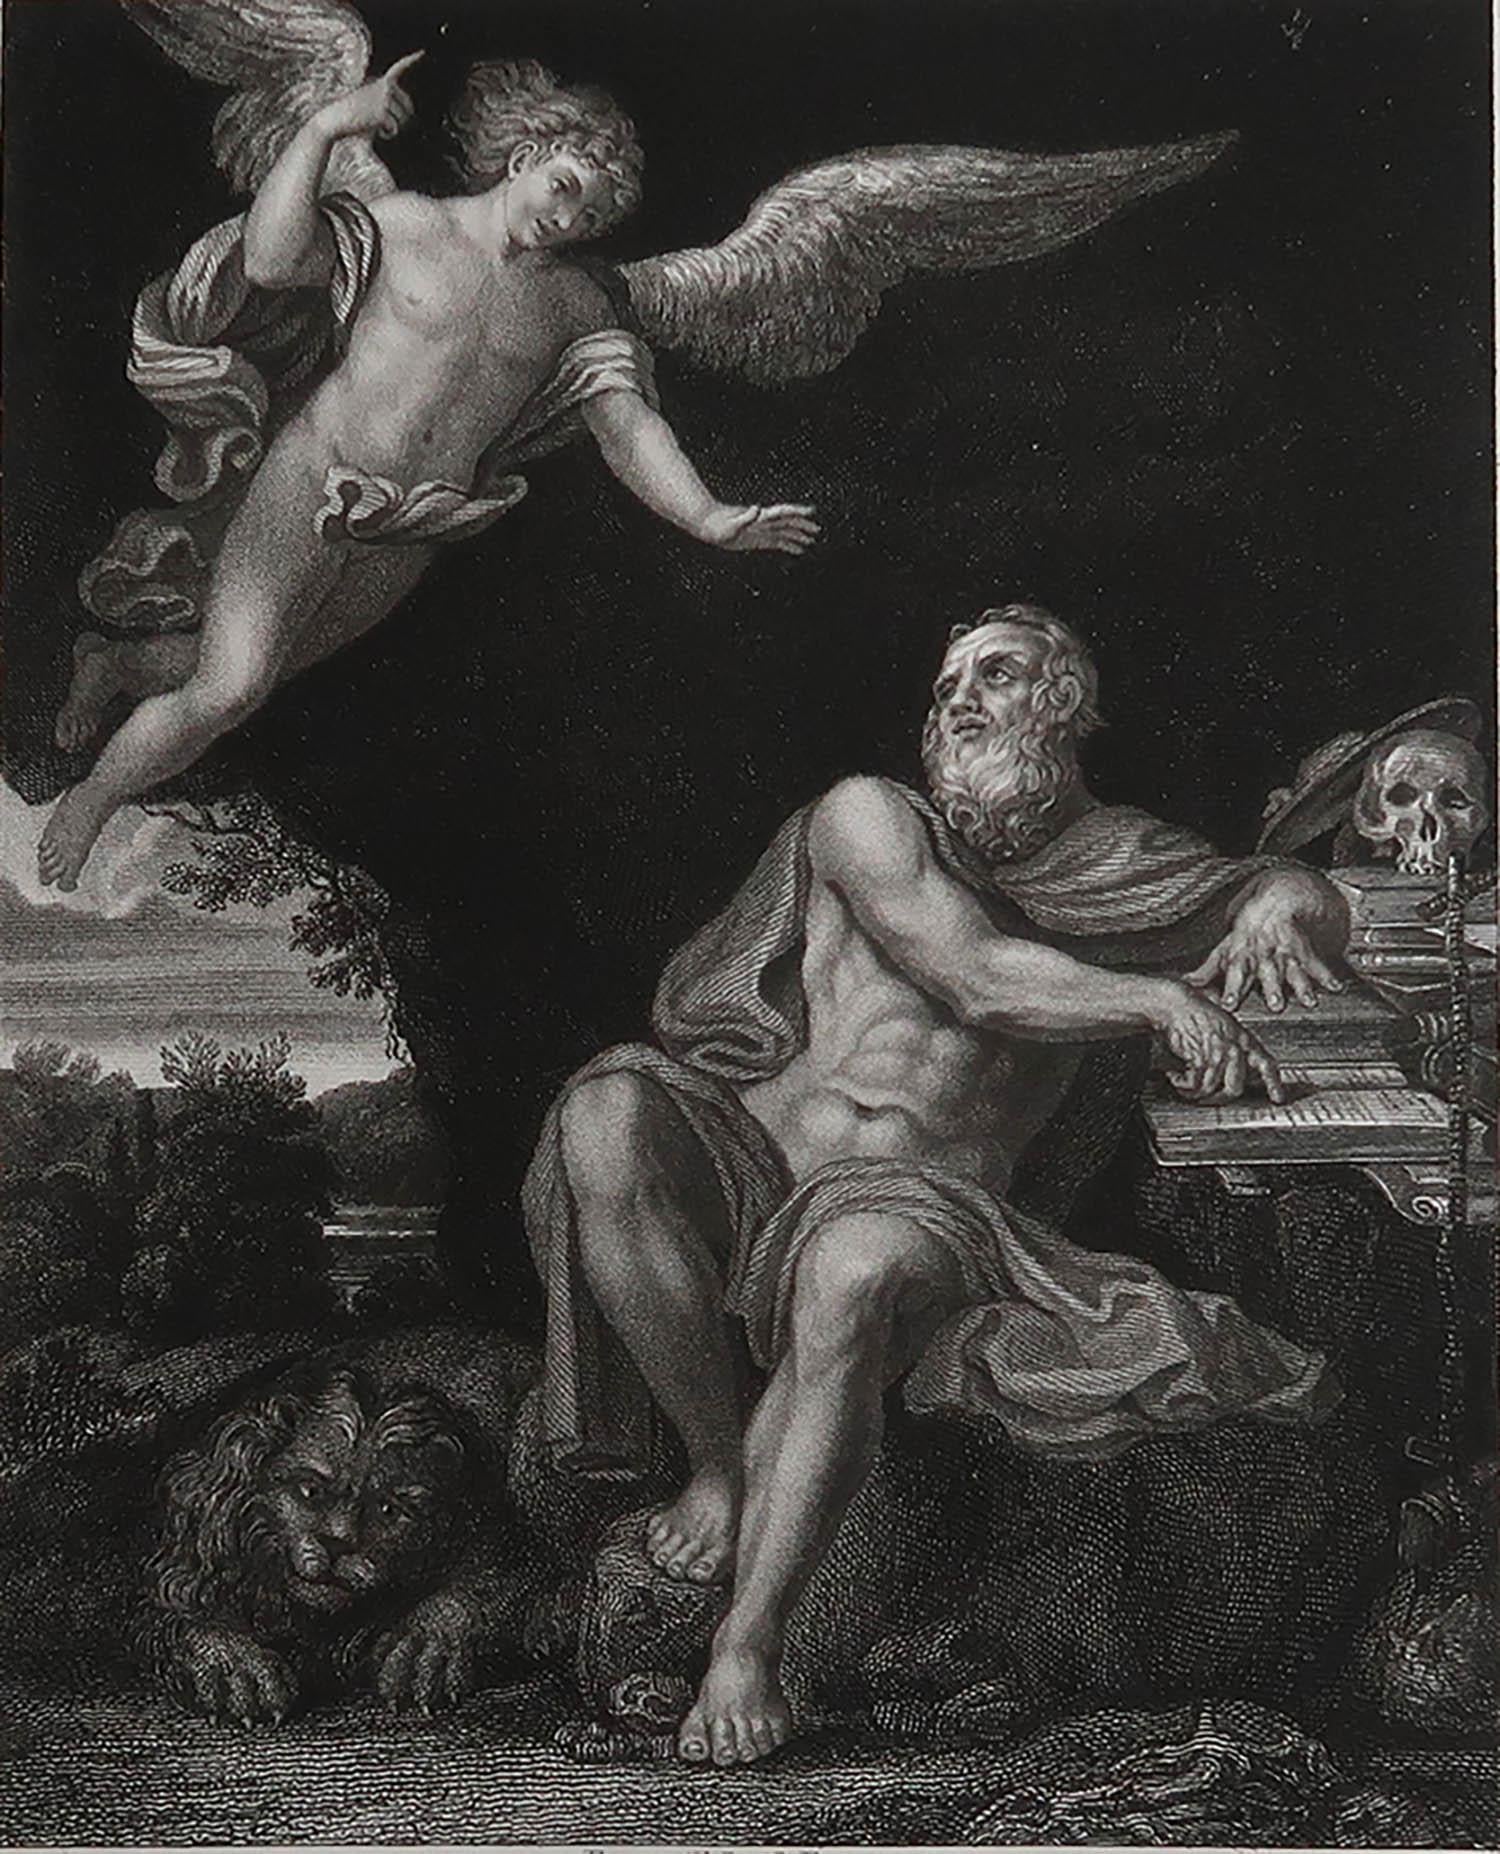 Wonderful image after Domenichino

Fine Steel engraving. 

Published by Jones & Co, London, circa 1850

Unframed.

